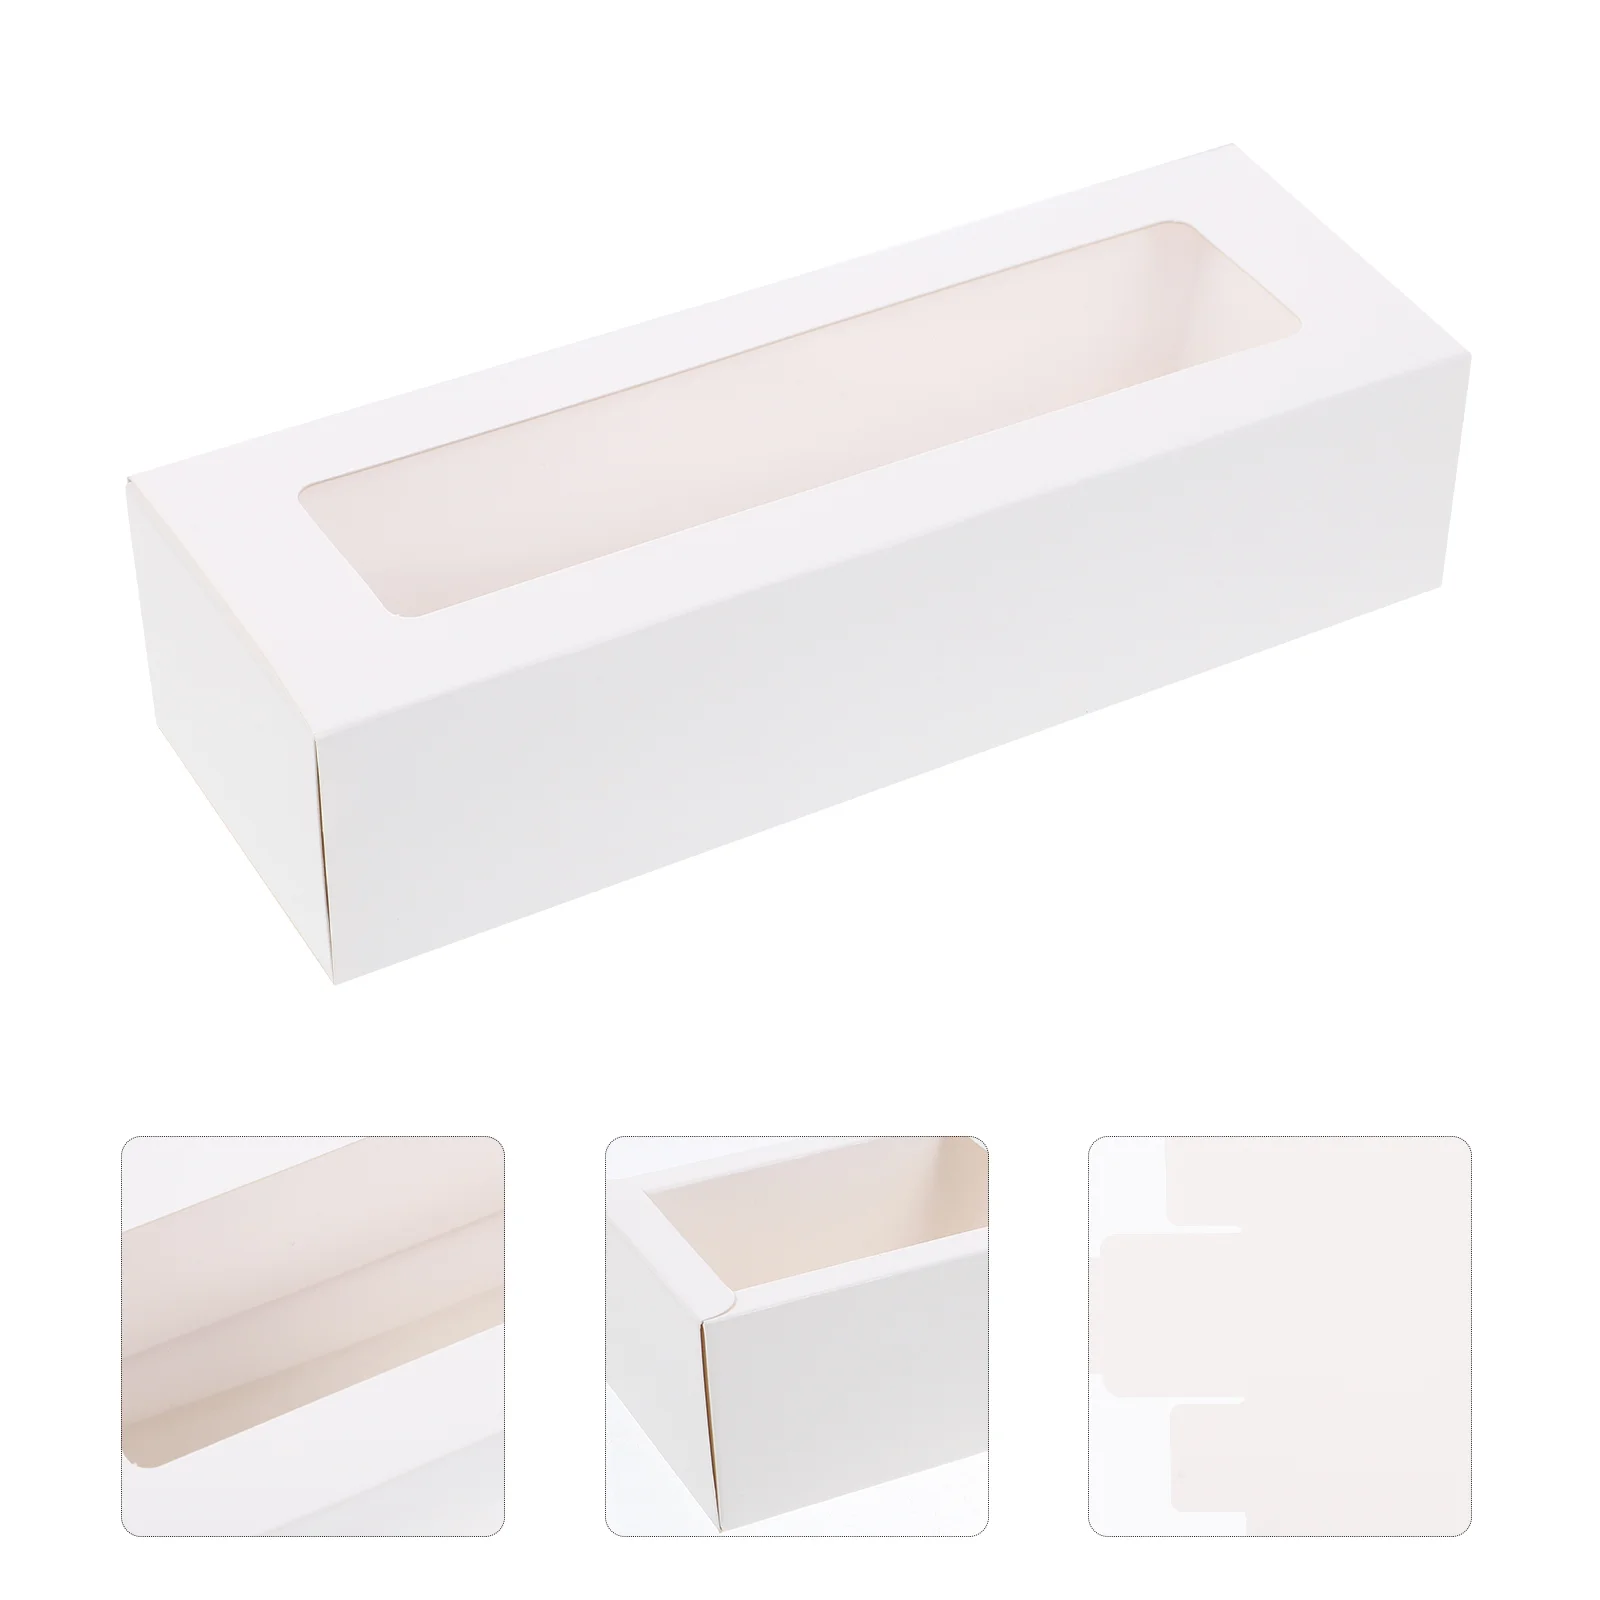 

Boxes Macaron Box Window Cookie Cupcake Container Gift Packaging Paper Bakery Cake Mini Holder Containers Pastry Packing Muffin